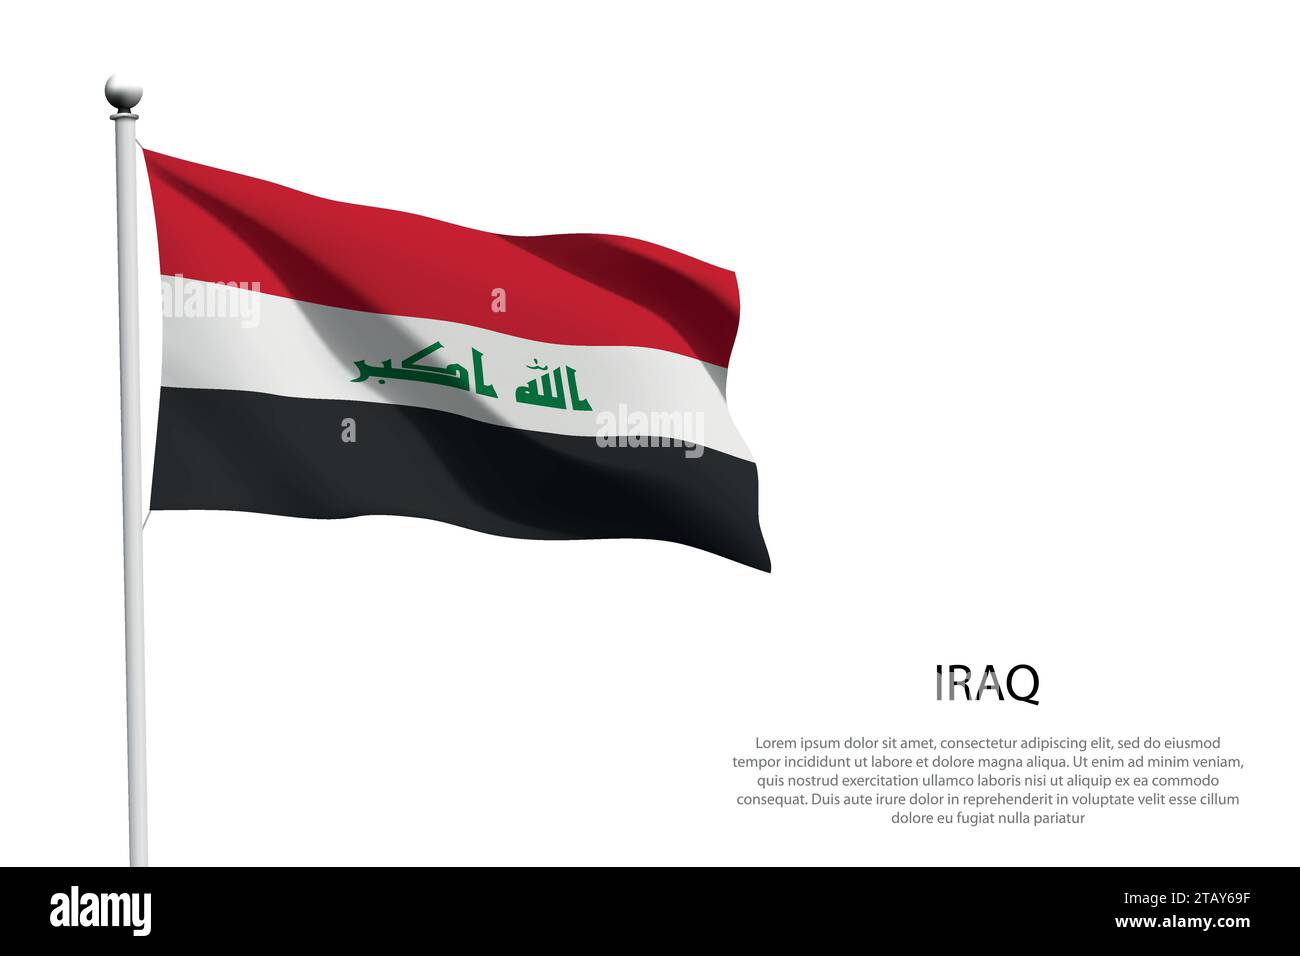 Iraq silk flag Cut Out Stock Images & Pictures - Alamy